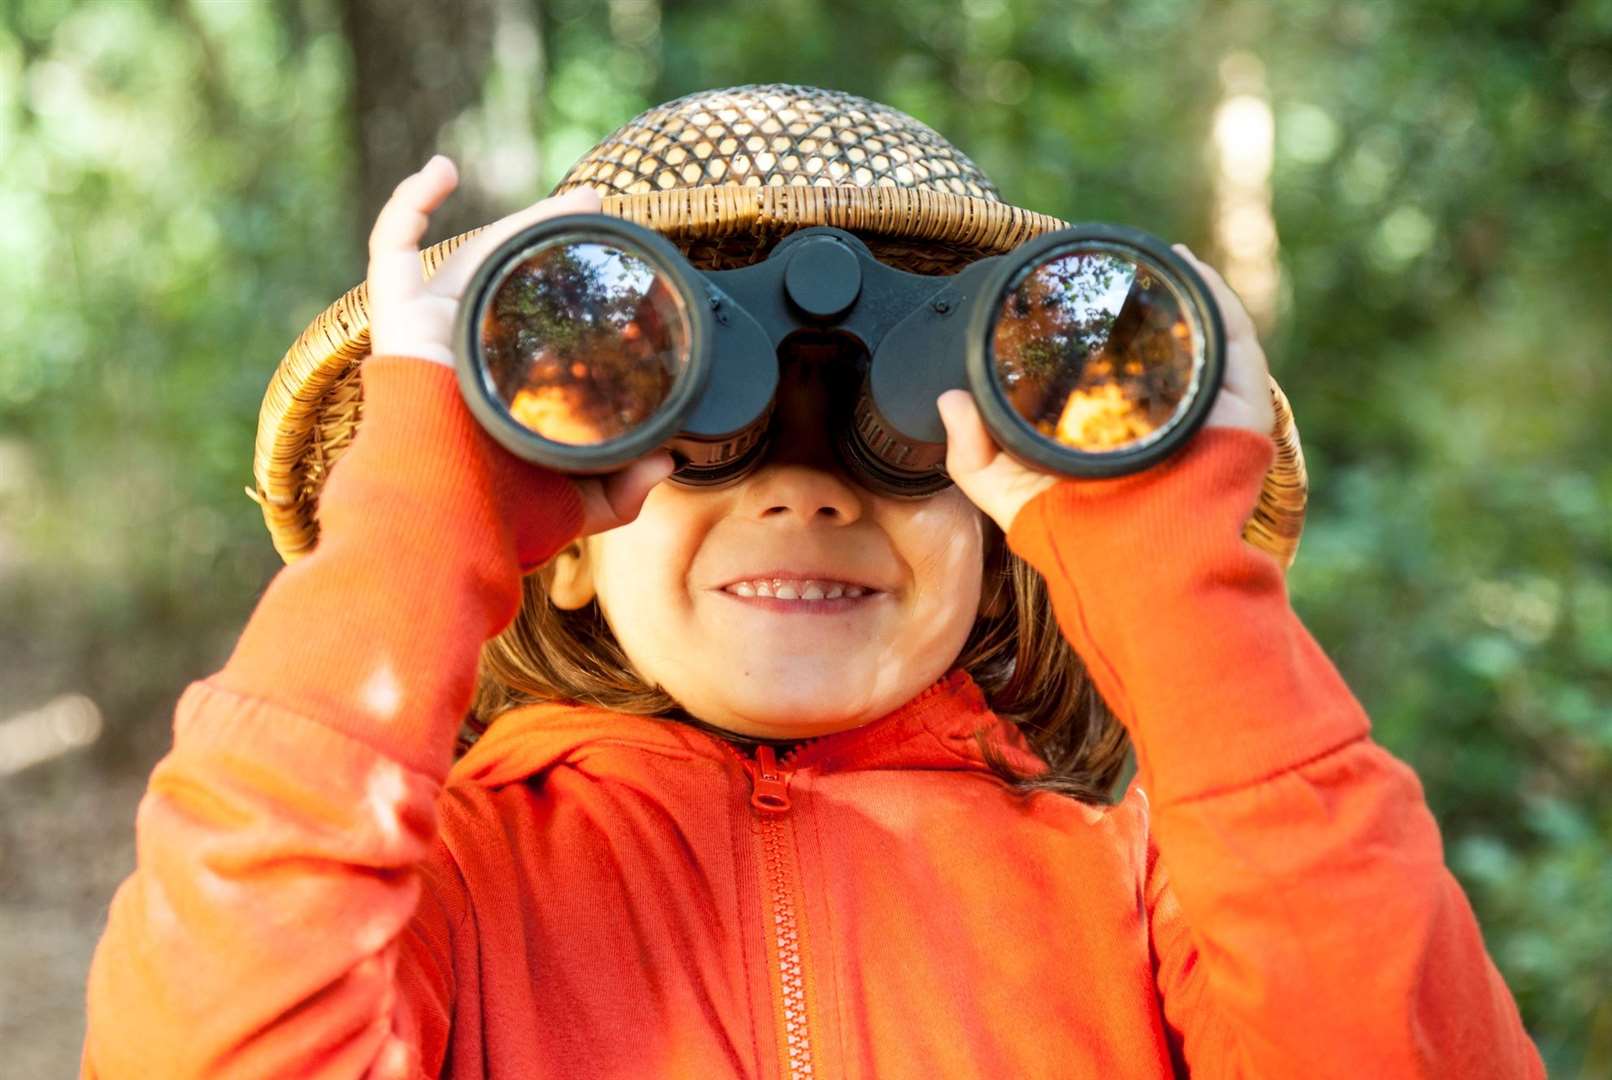 One young girl tries her hand at bird-watching.